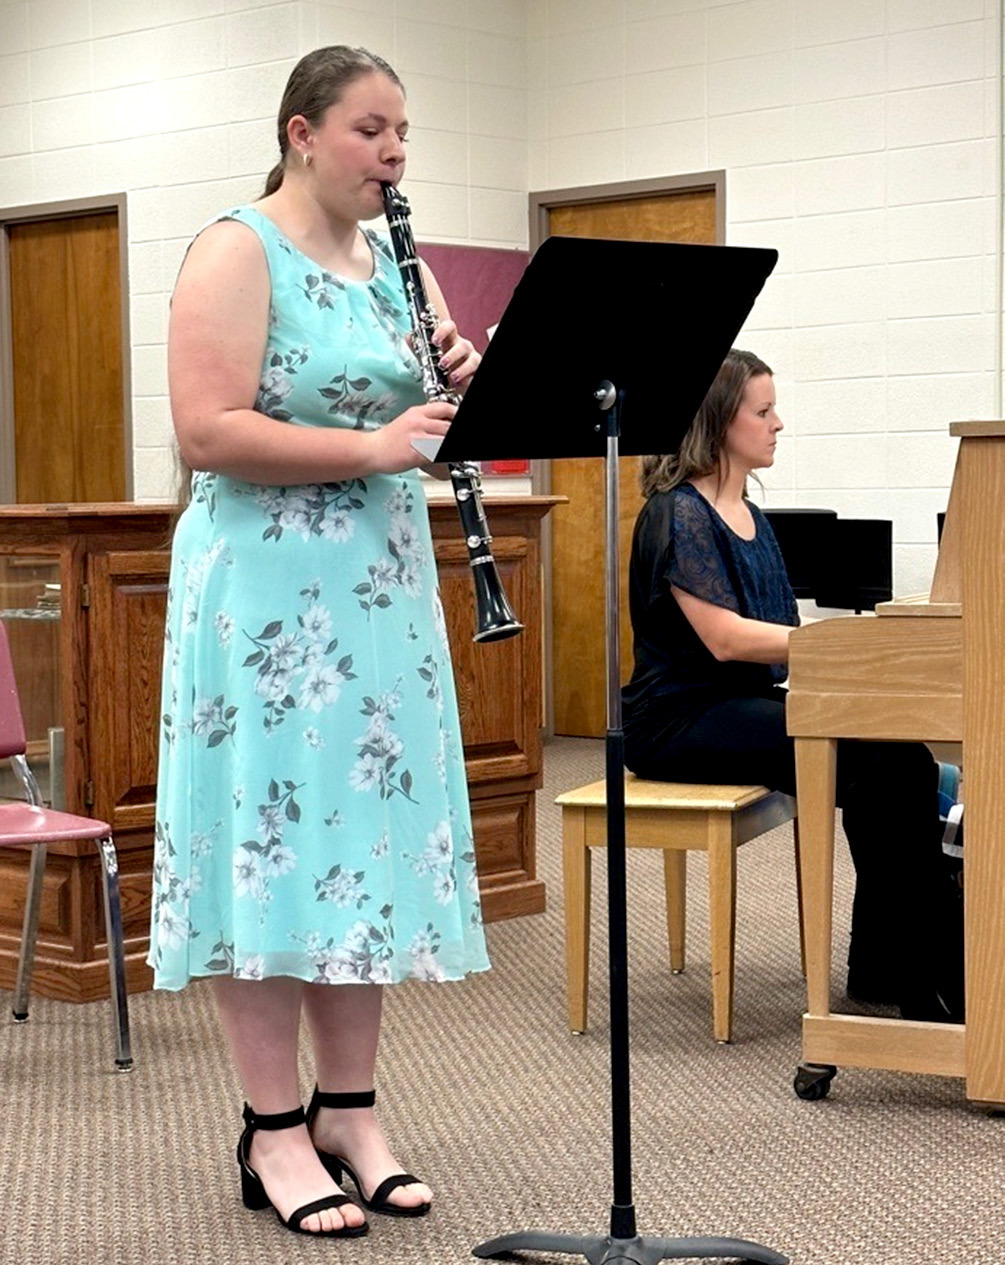 STOCKTON HIGH SCHOOL MUSIC STUDENT Cheyene Carlson received a I Rating for her clarinet solo at the Regional Music Contest held in Oberlin on Saturday, April 15th. Cheyene will now perform her solo at the State Music Contest on Saturday, April 29th, in Hesston.